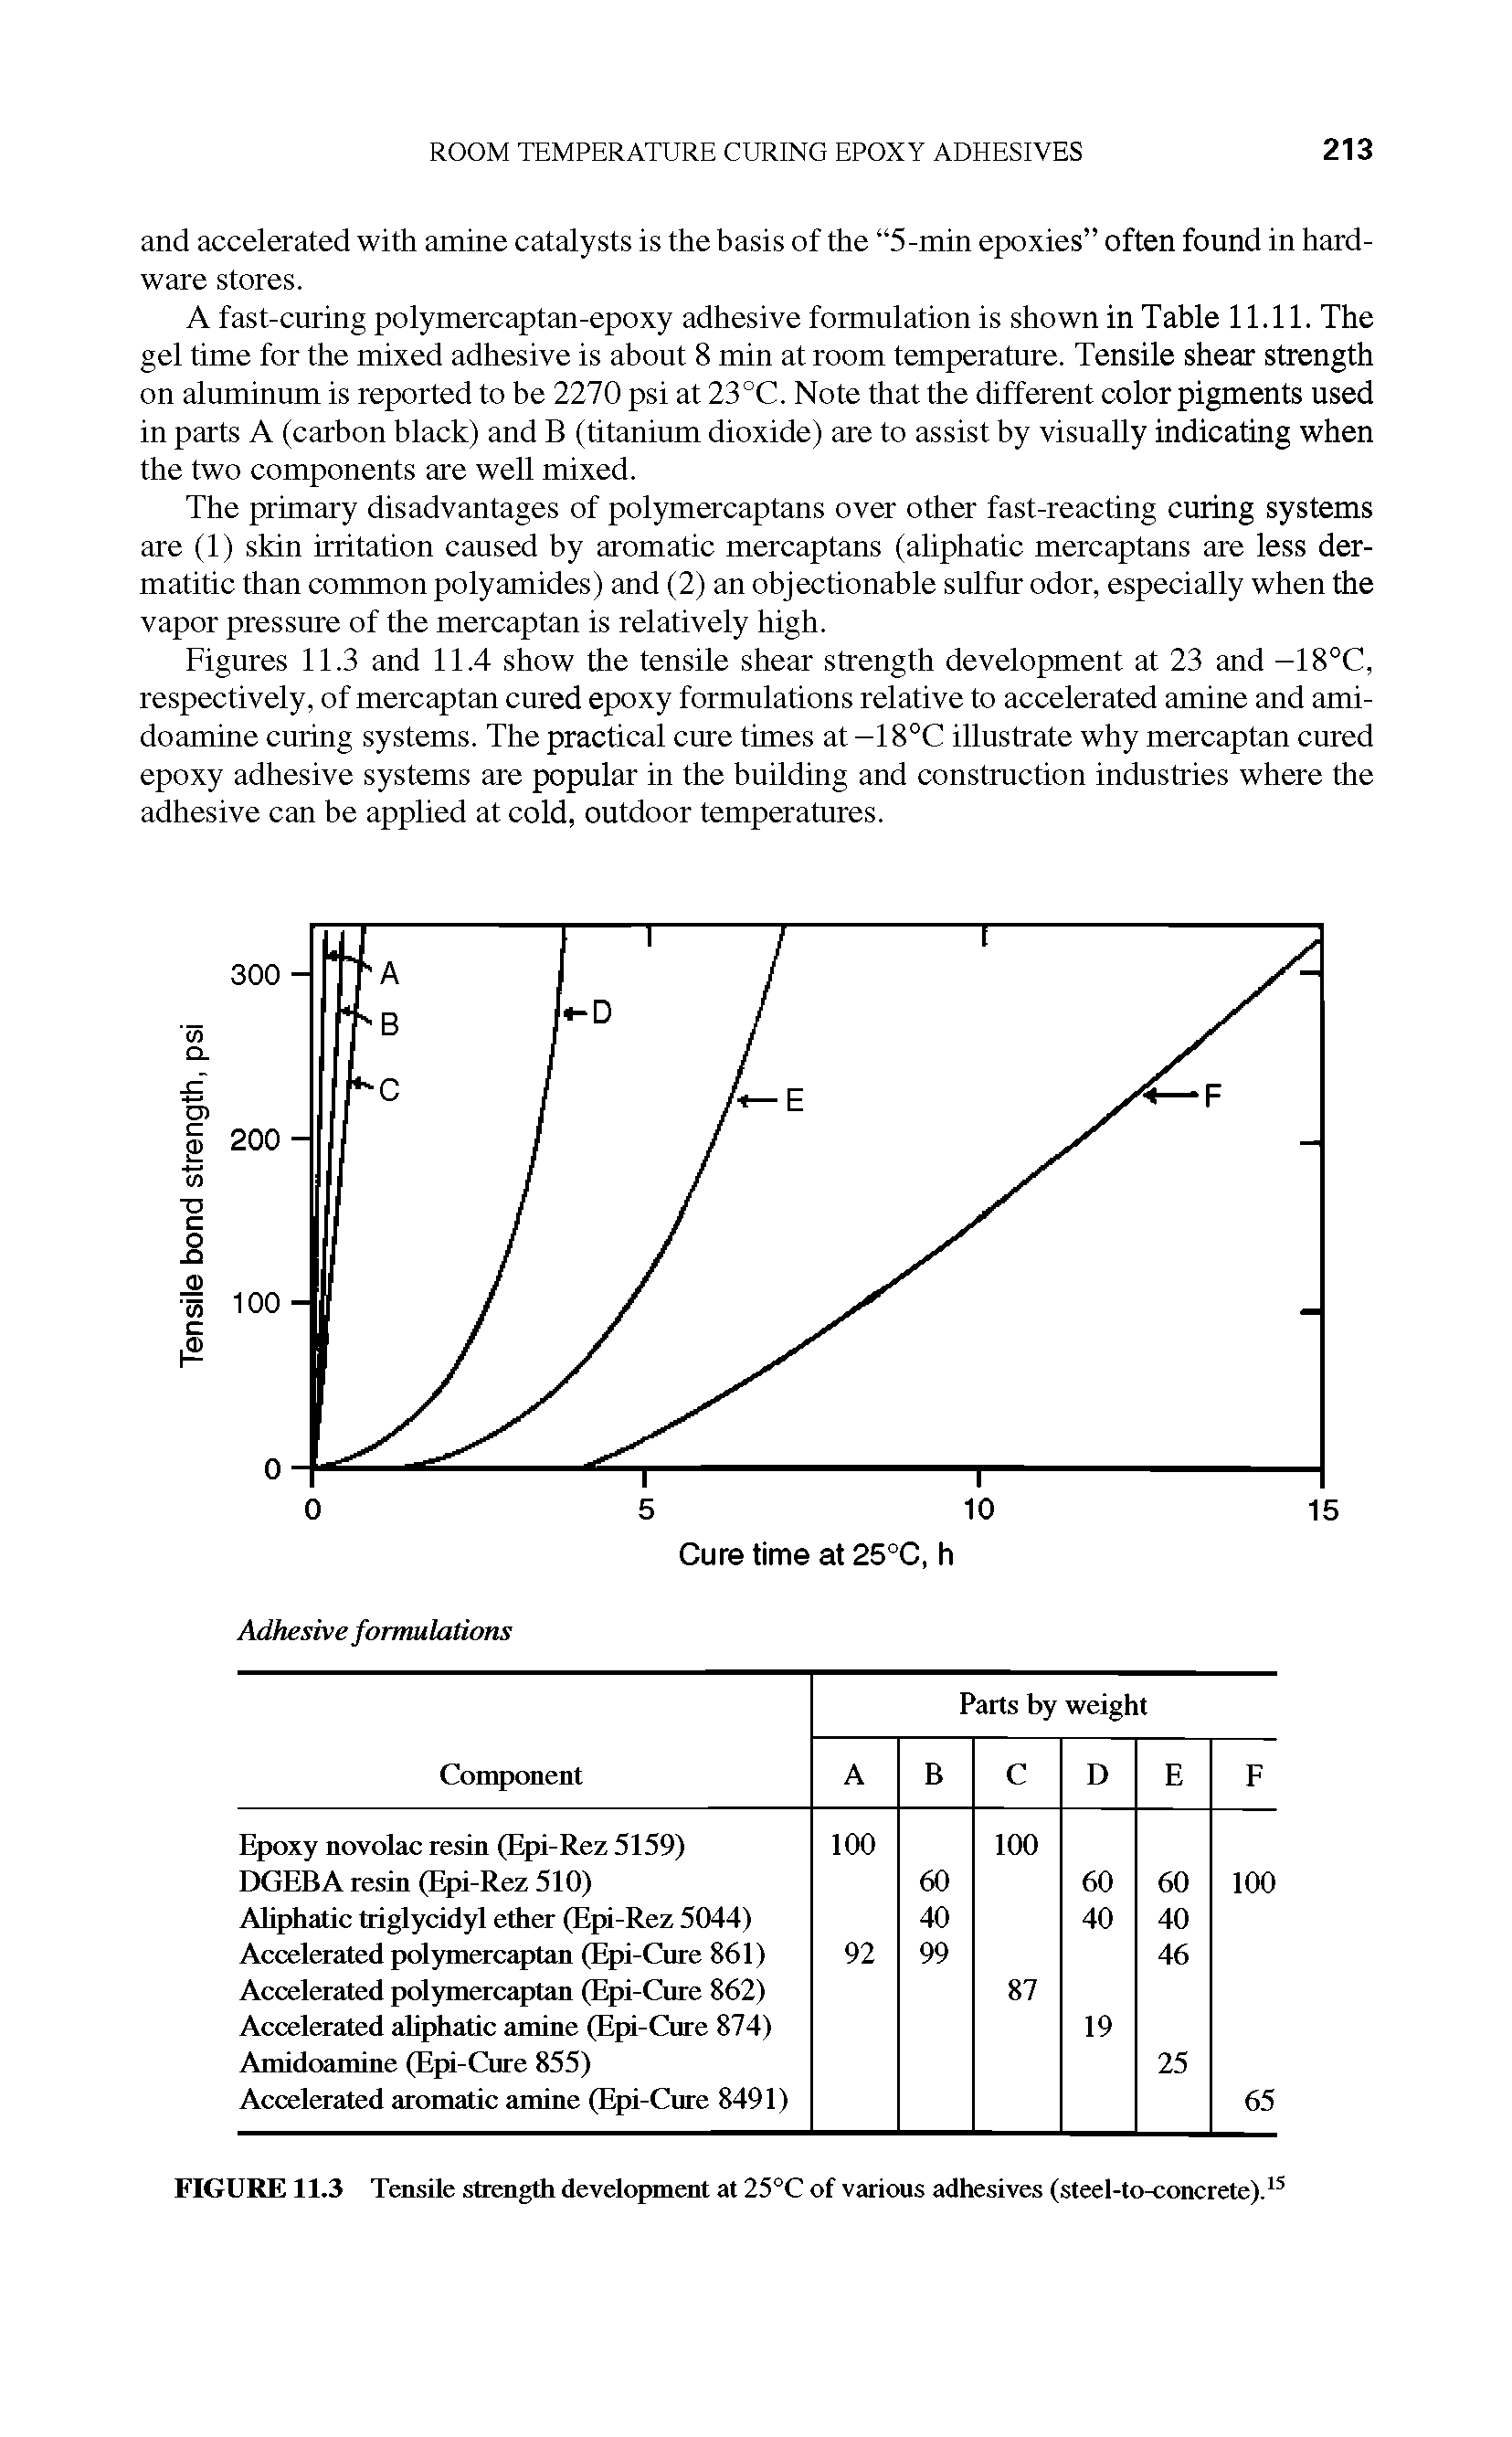 Figures 11.3 and 11.4 show the tensile shear strength development at 23 and -18°C, respectively, of mercaptan cured epoxy formulations relative to accelerated amine and ami-doamine curing systems. The practical cure times at -18°C illustrate why mercaptan cured epoxy adhesive systems are popular in the building and construction industries where the adhesive can be applied at cold, outdoor temperatures.